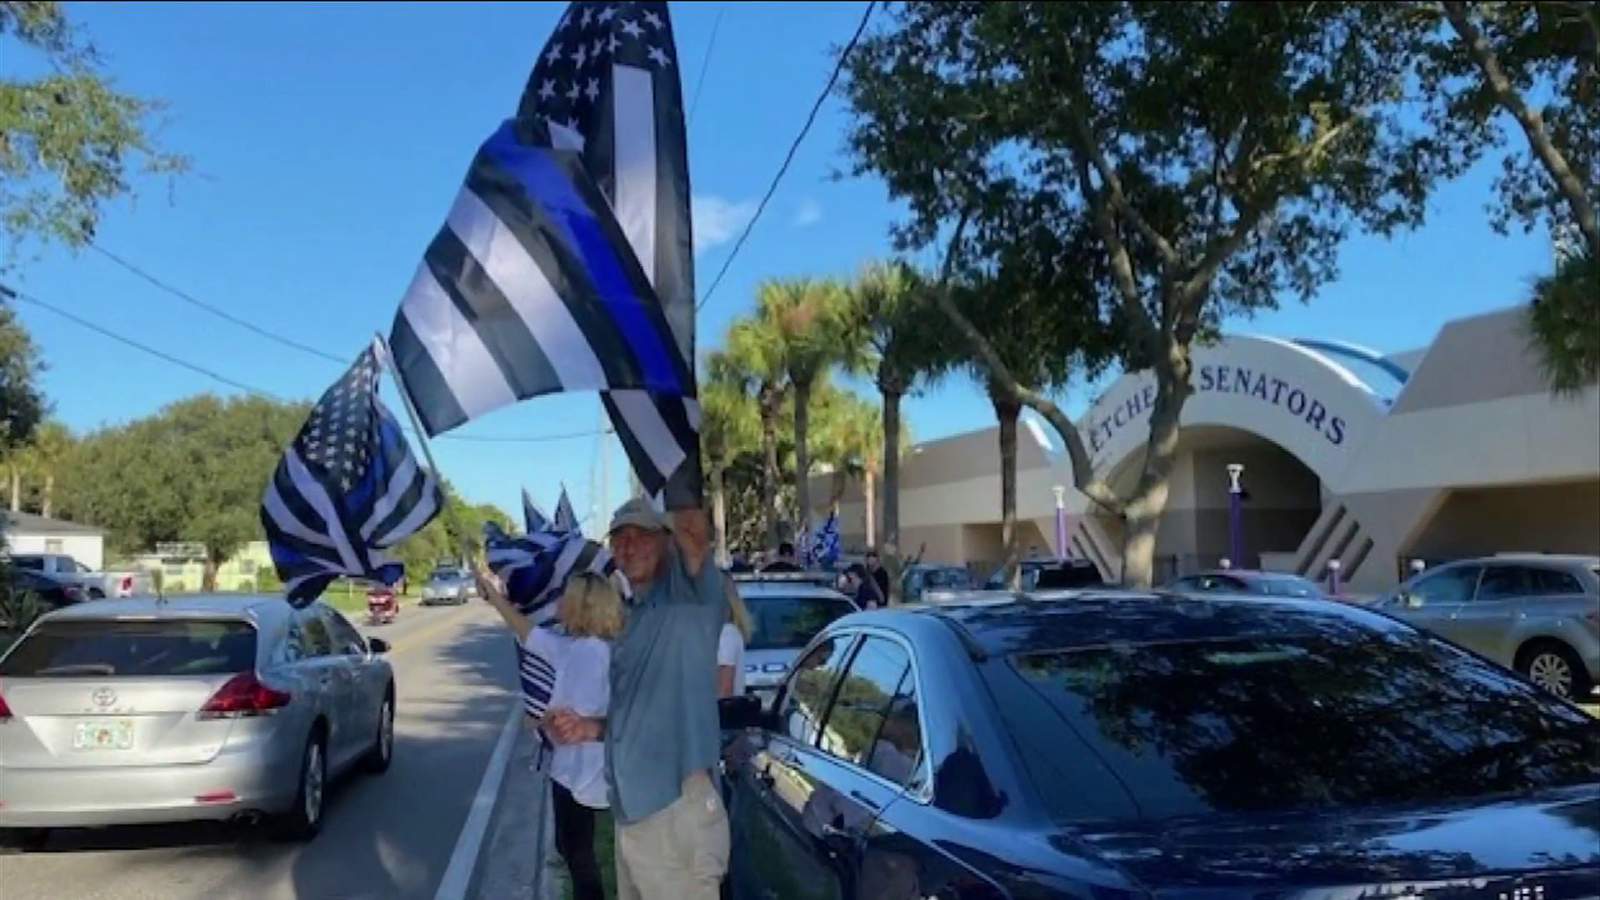 With Thin Blue Line flags & signs, dozens gather outside Fletcher High School